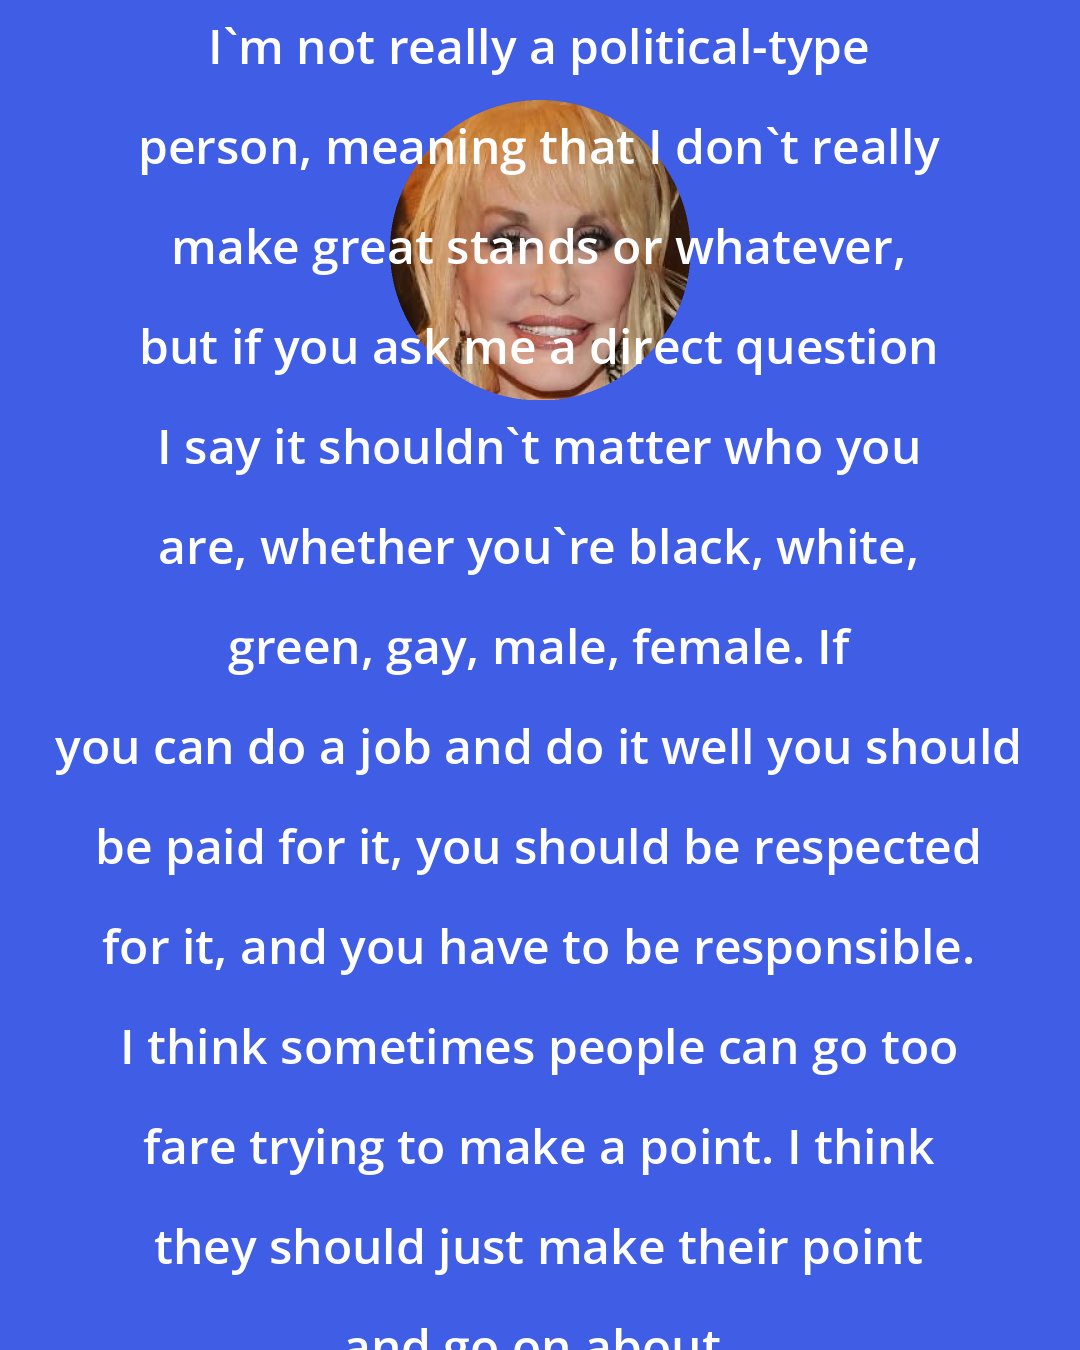 Dolly Parton: I'm not really a political-type person, meaning that I don't really make great stands or whatever, but if you ask me a direct question I say it shouldn't matter who you are, whether you're black, white, green, gay, male, female. If you can do a job and do it well you should be paid for it, you should be respected for it, and you have to be responsible. I think sometimes people can go too fare trying to make a point. I think they should just make their point and go on about.